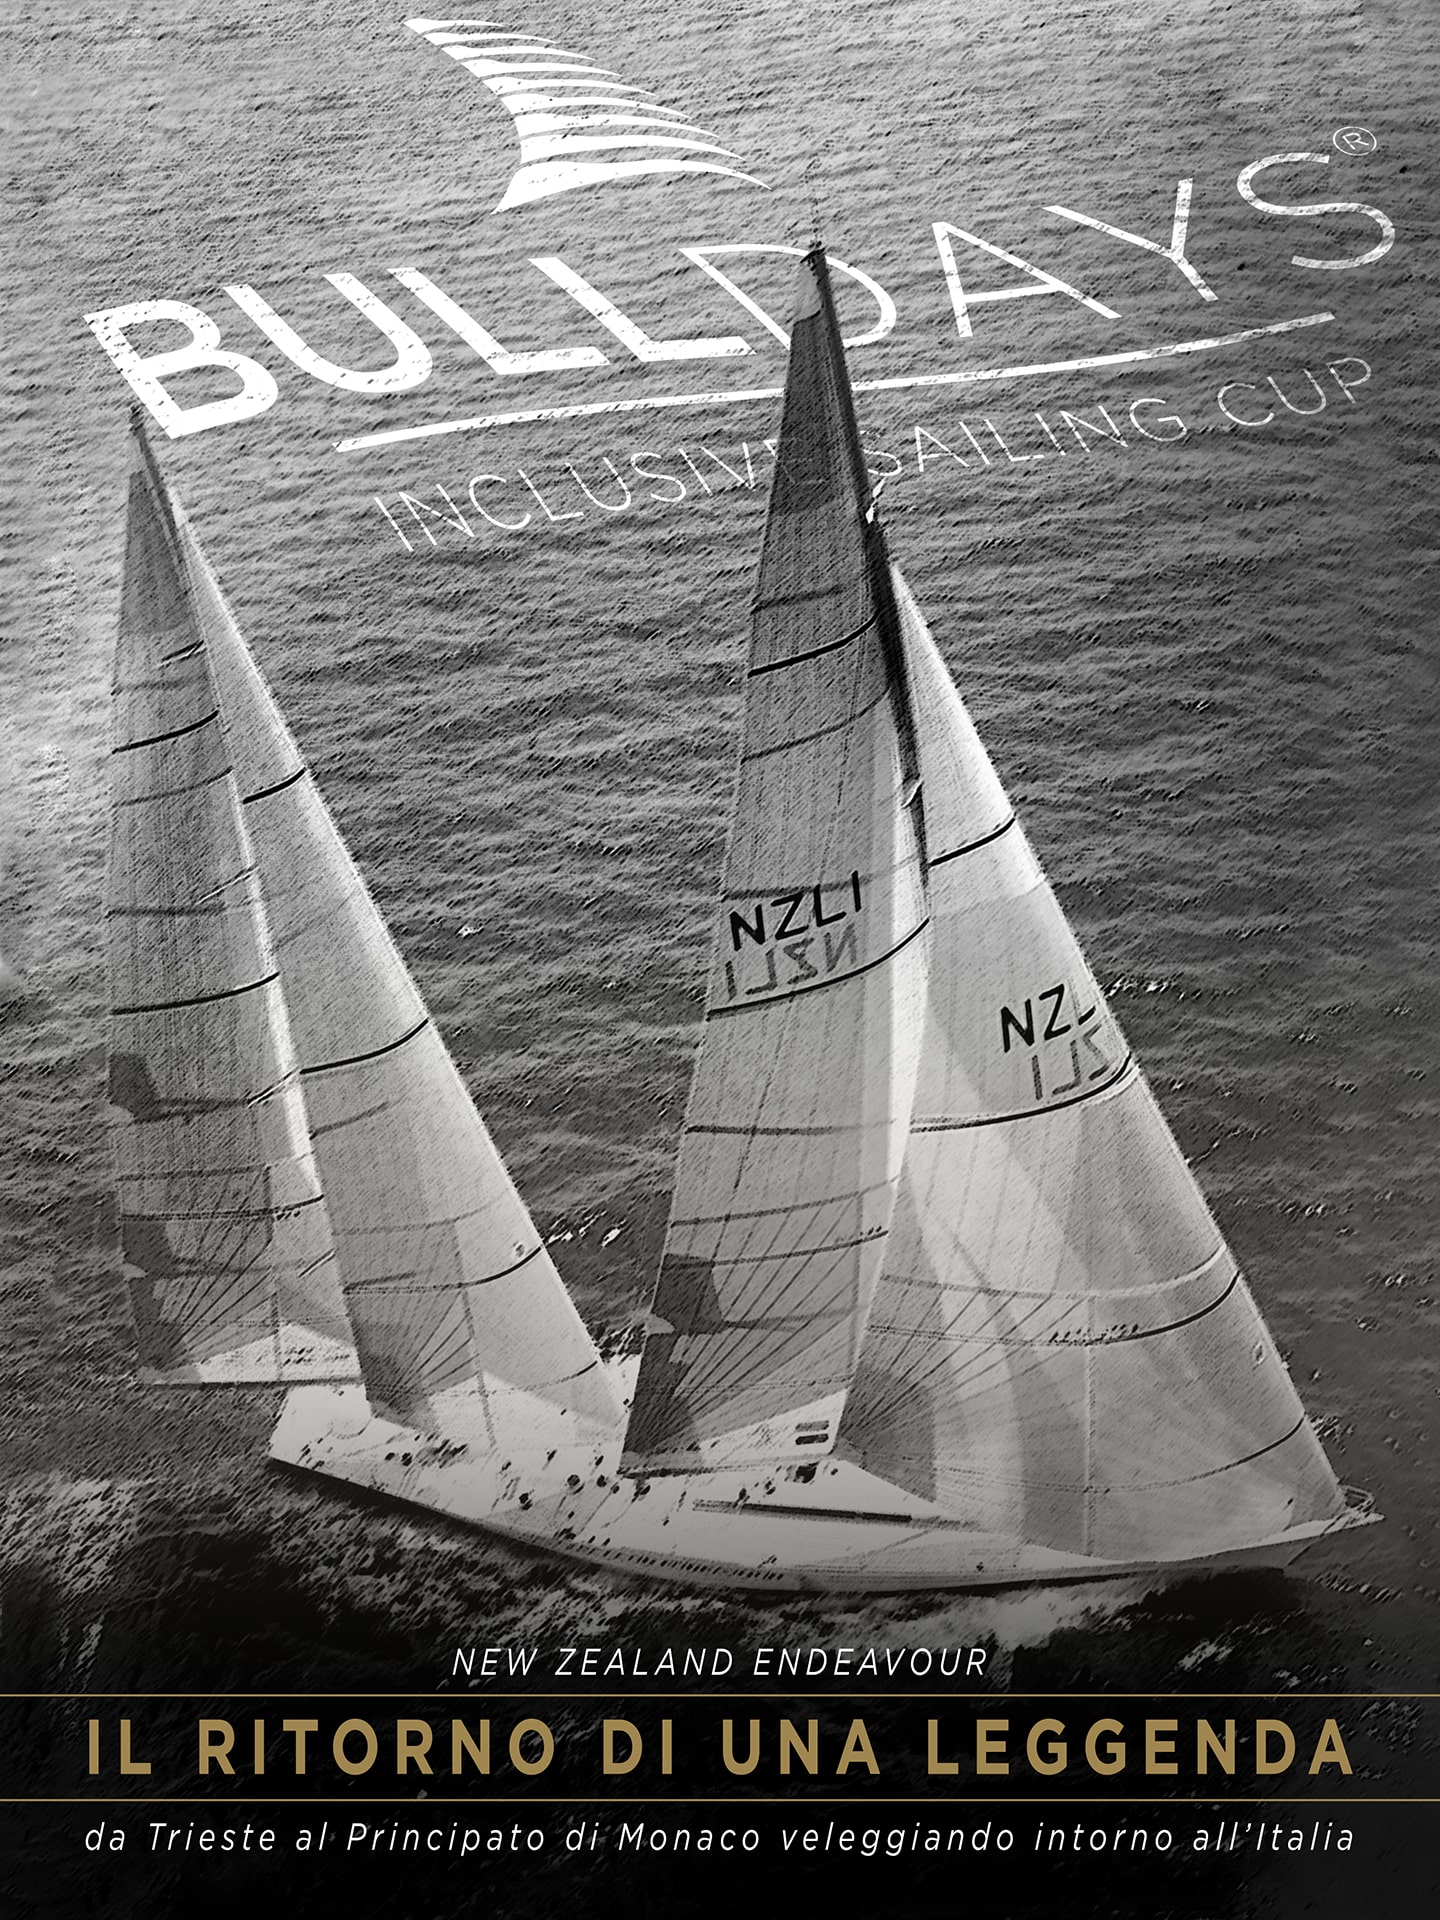 new zealand endeavour bull days inclusive sailing cup